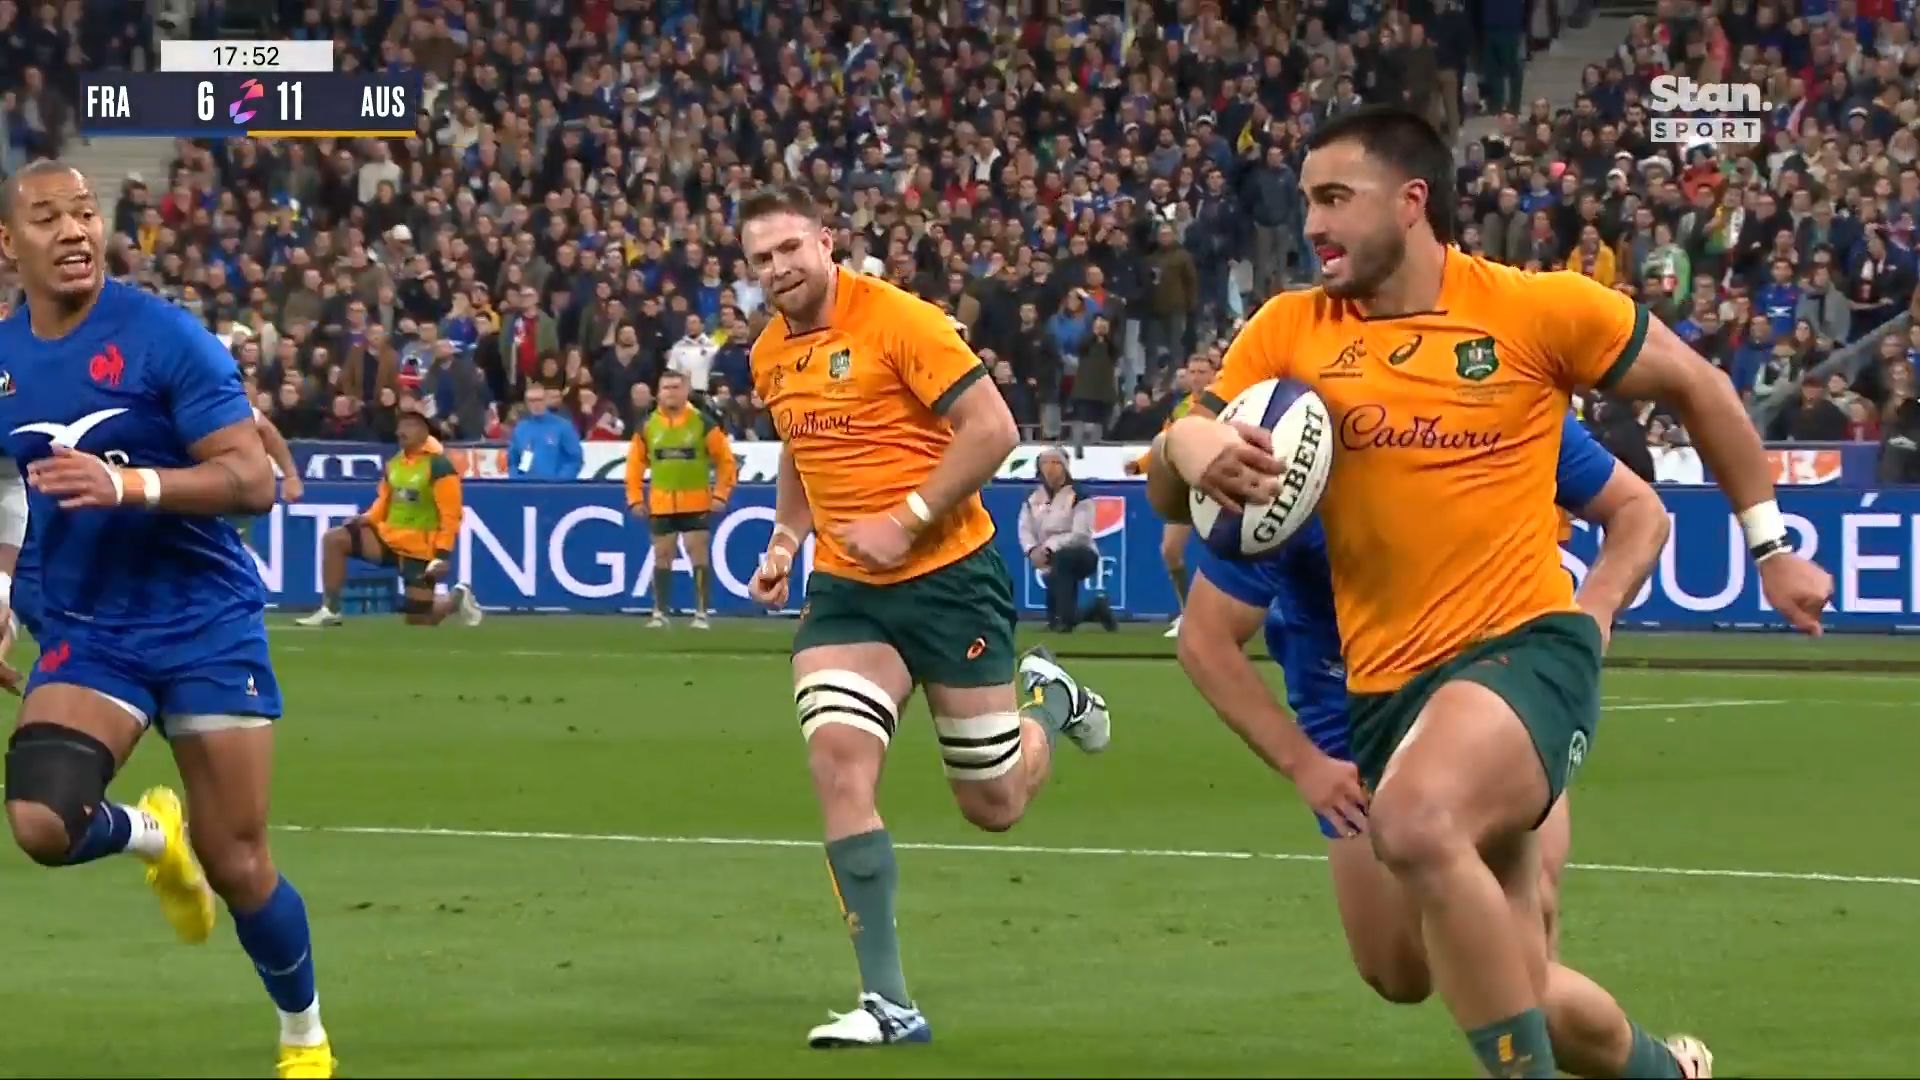 Wallabies run the length of the field in 'try from the end of the Earth'